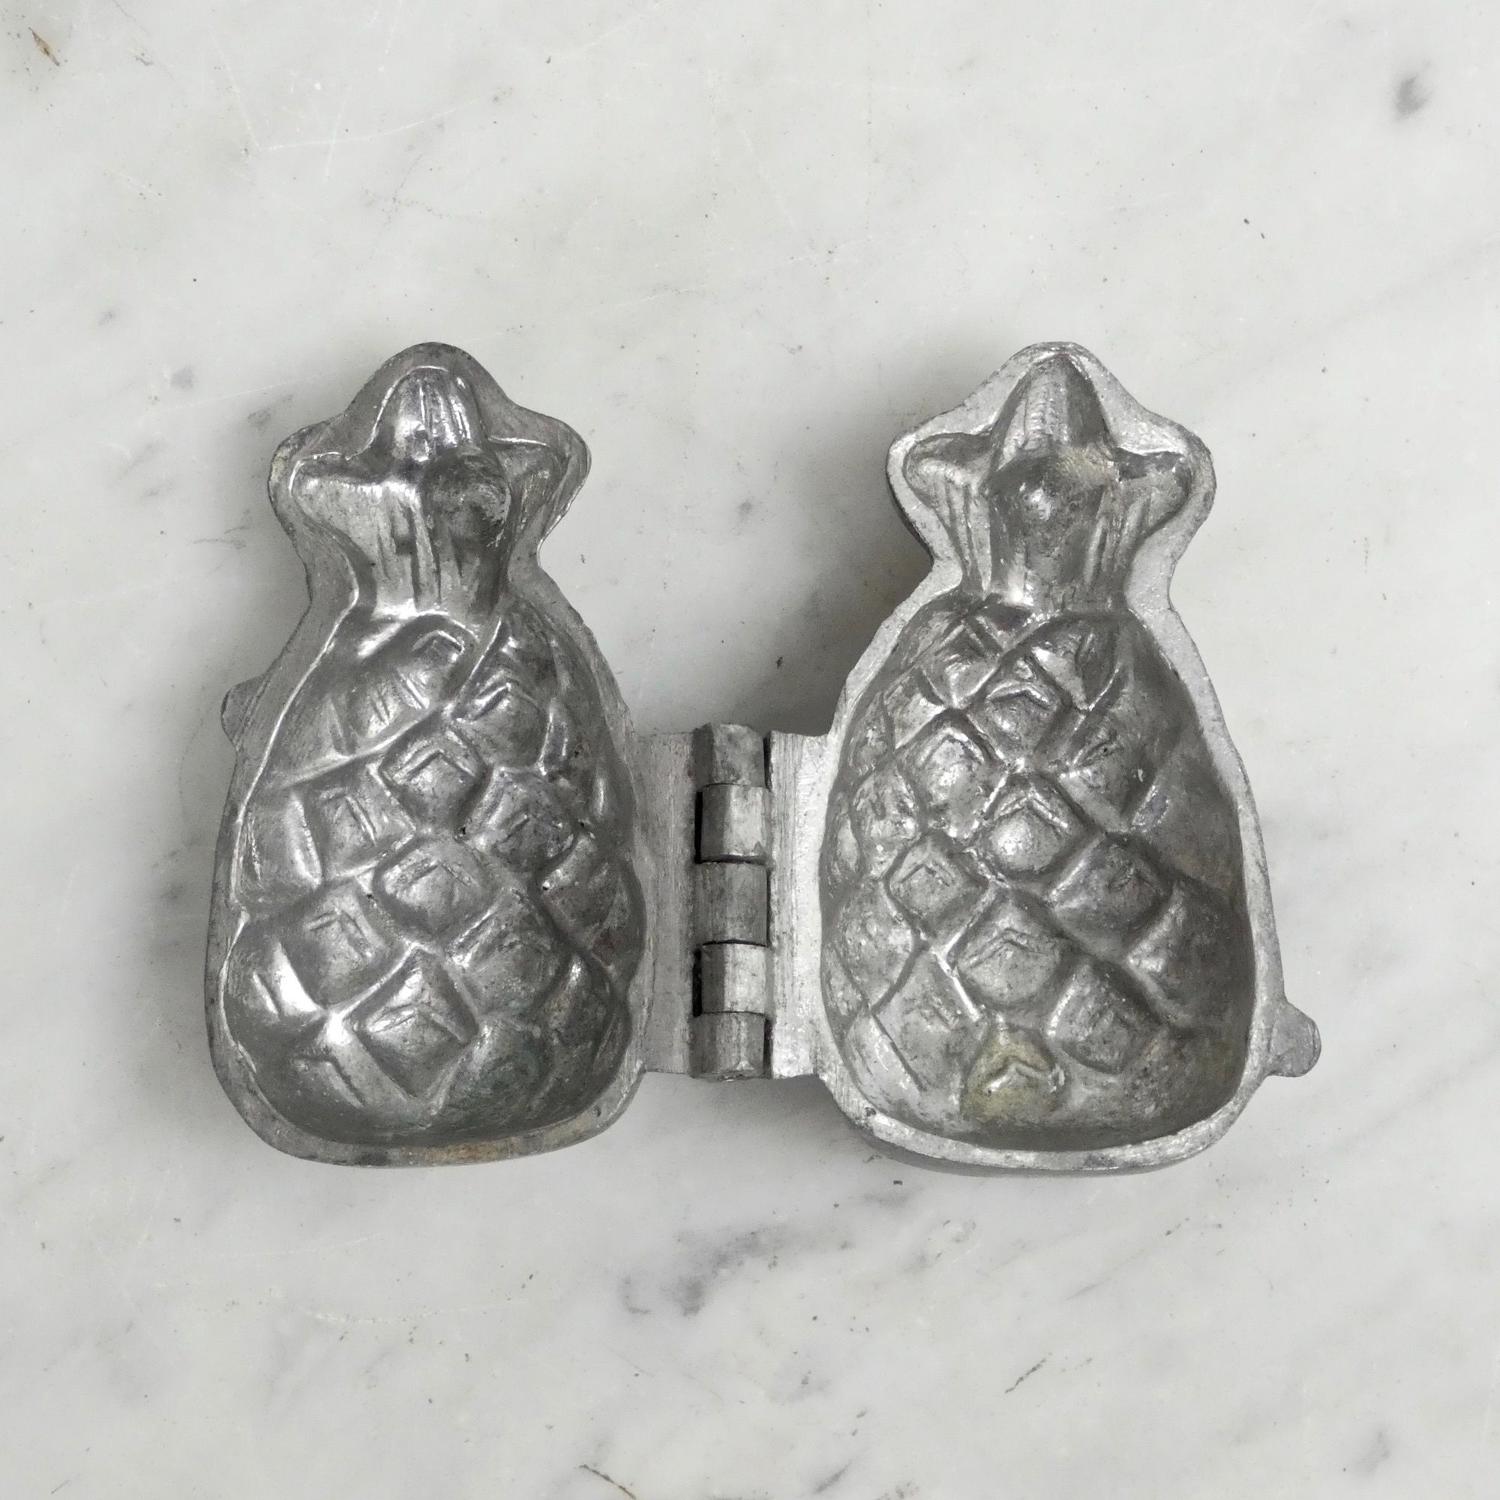 Pewter pineapple mould